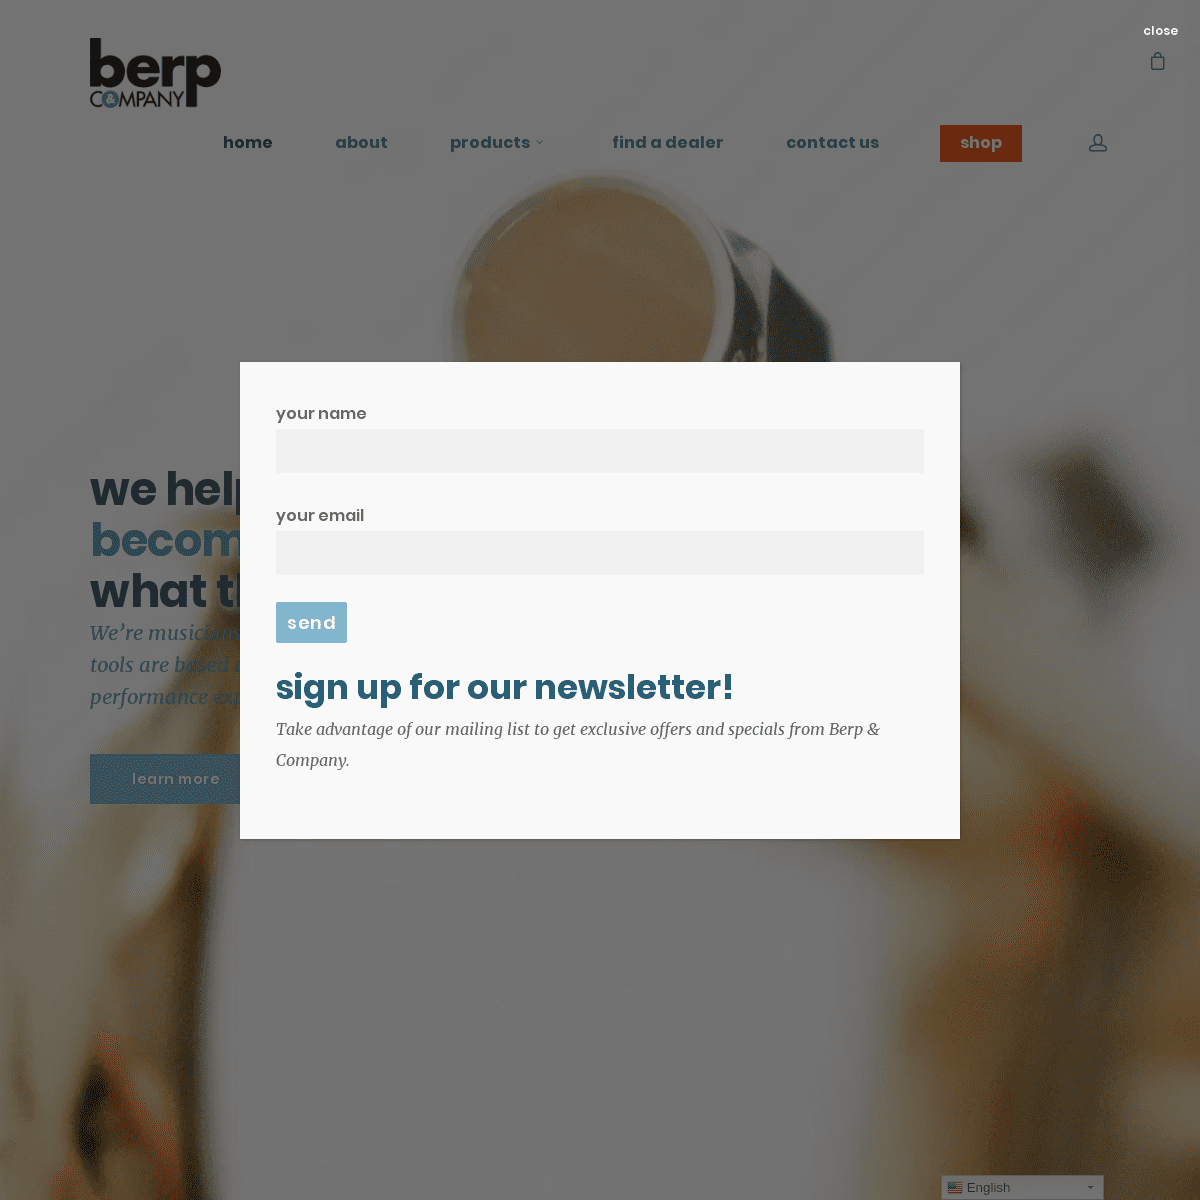 A complete backup of berp.com